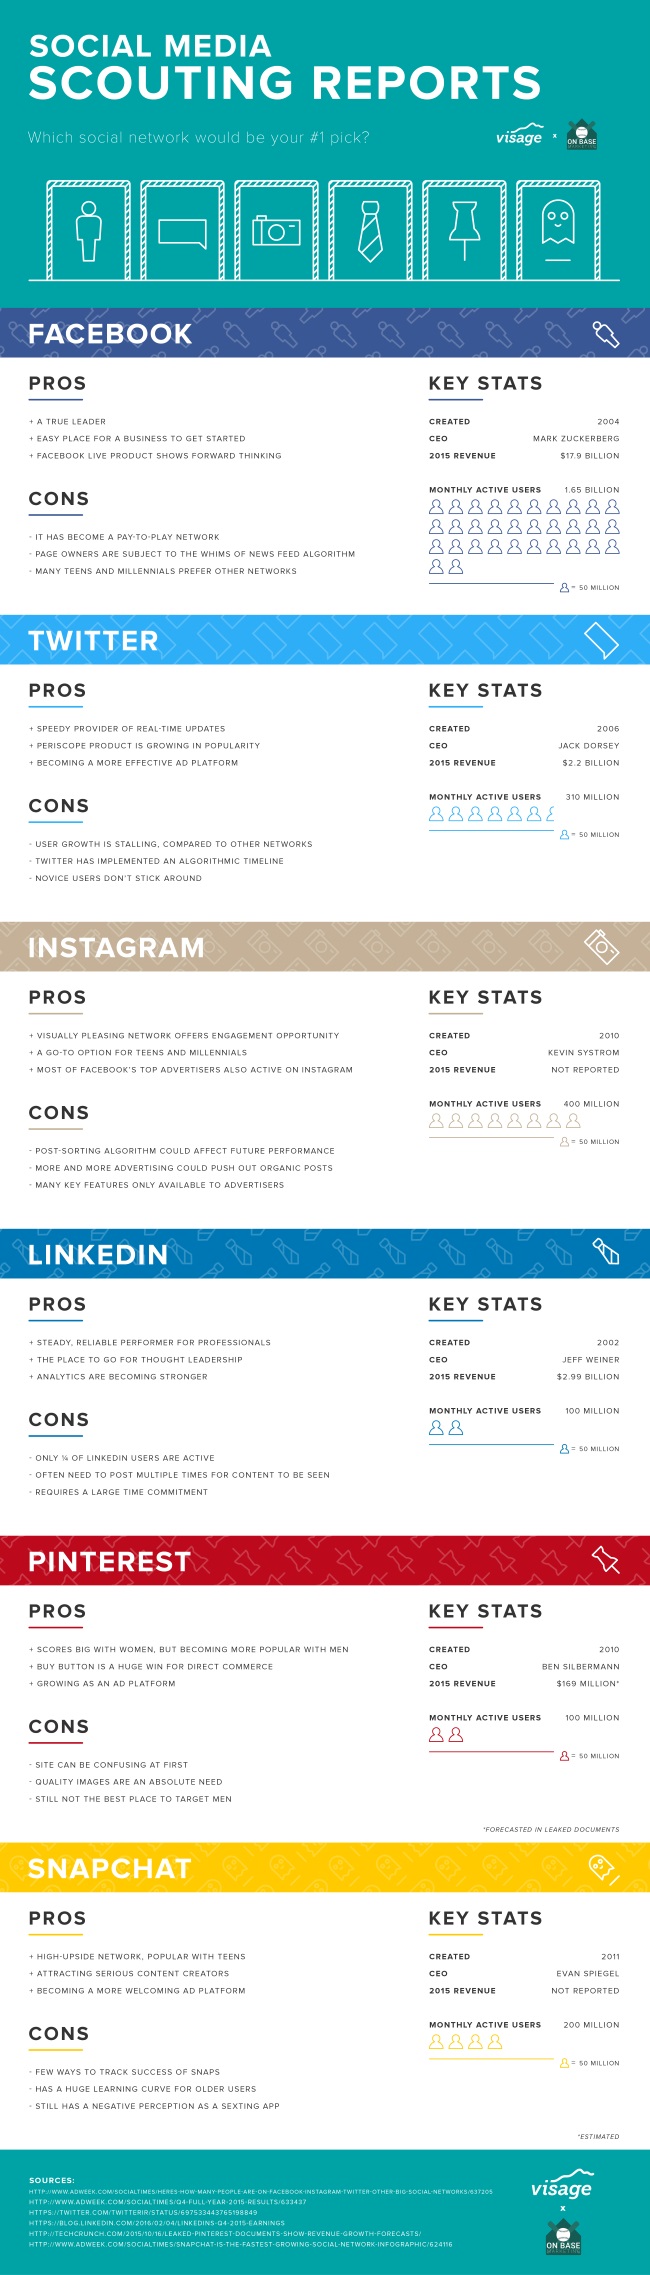 pros-cons-social-networks-infographic.jpg